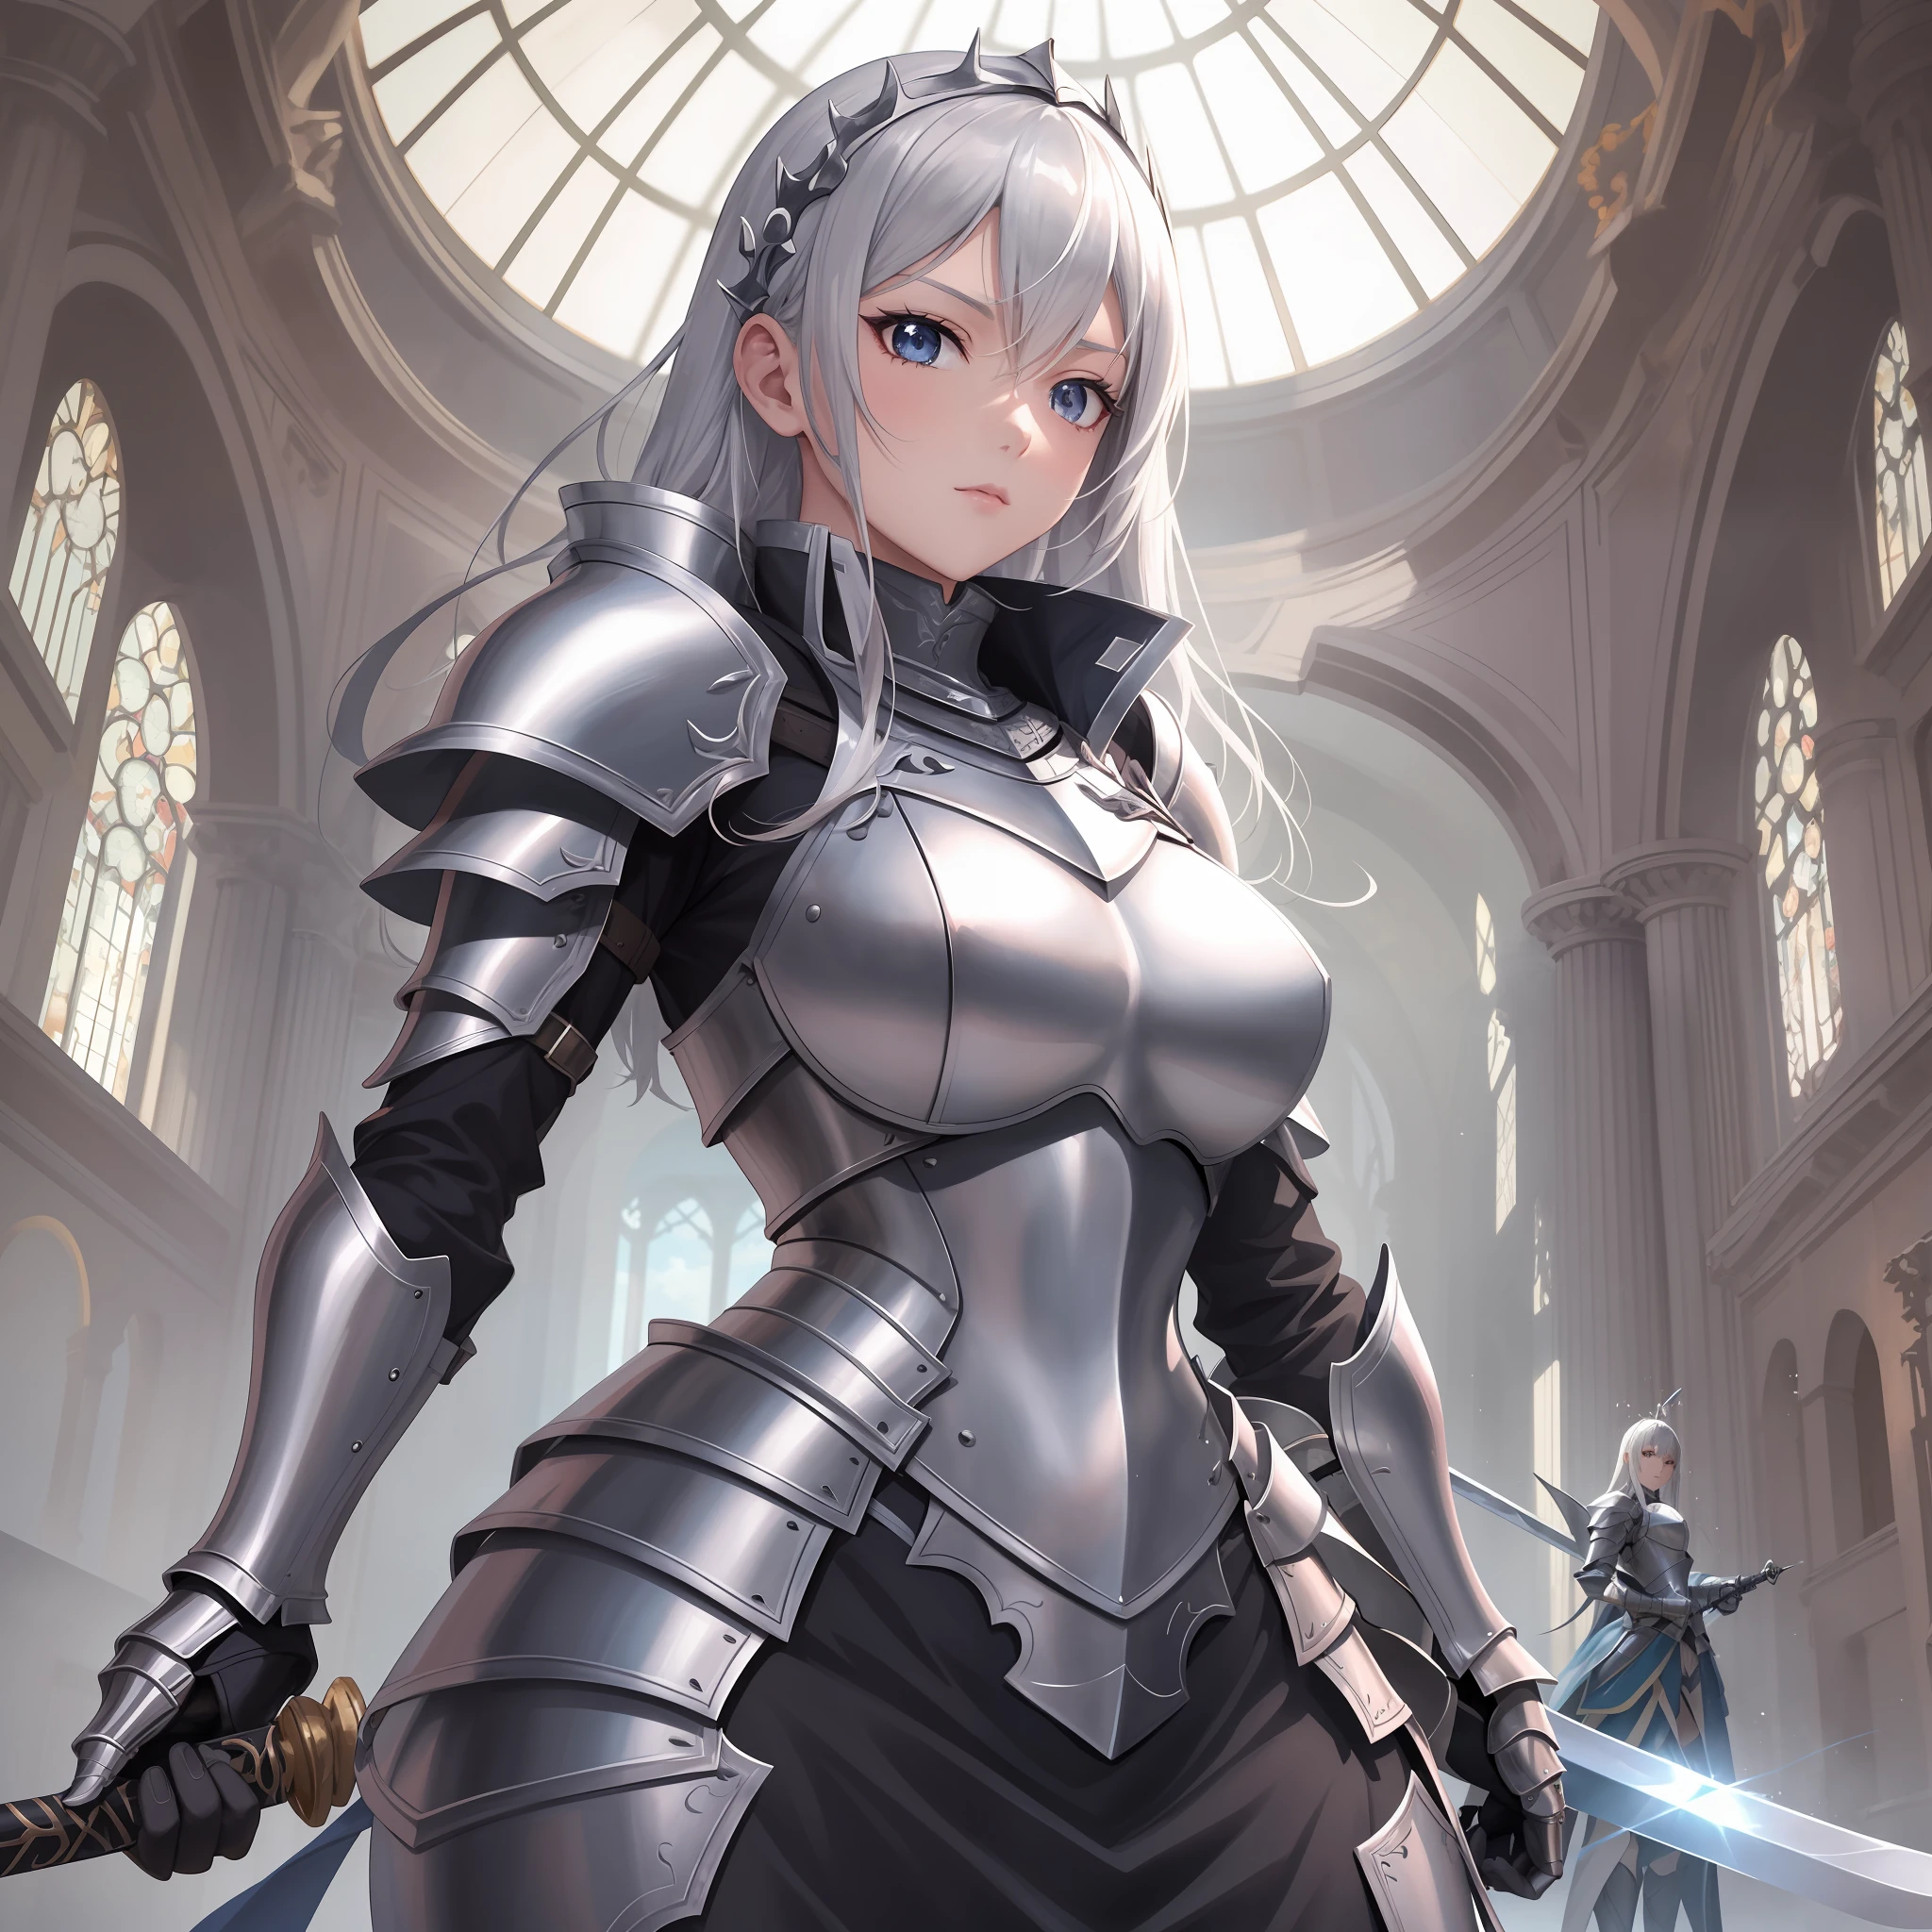 DreamShaper prompt: 4k anime girl in a battle armor and - PromptHero